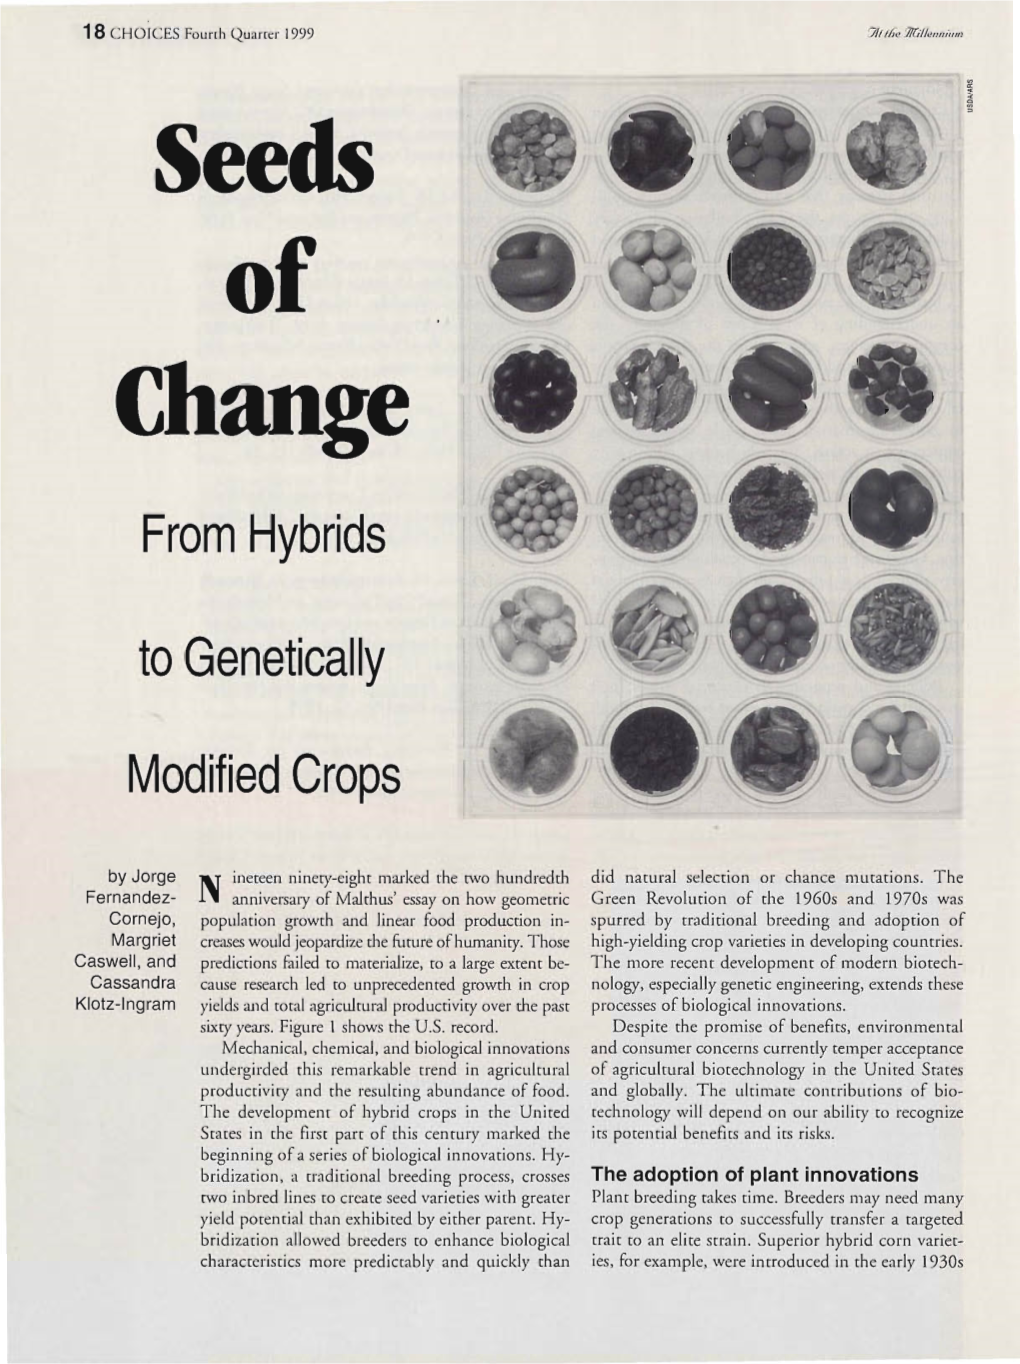 From Hybrids to Genetically Modified Crops